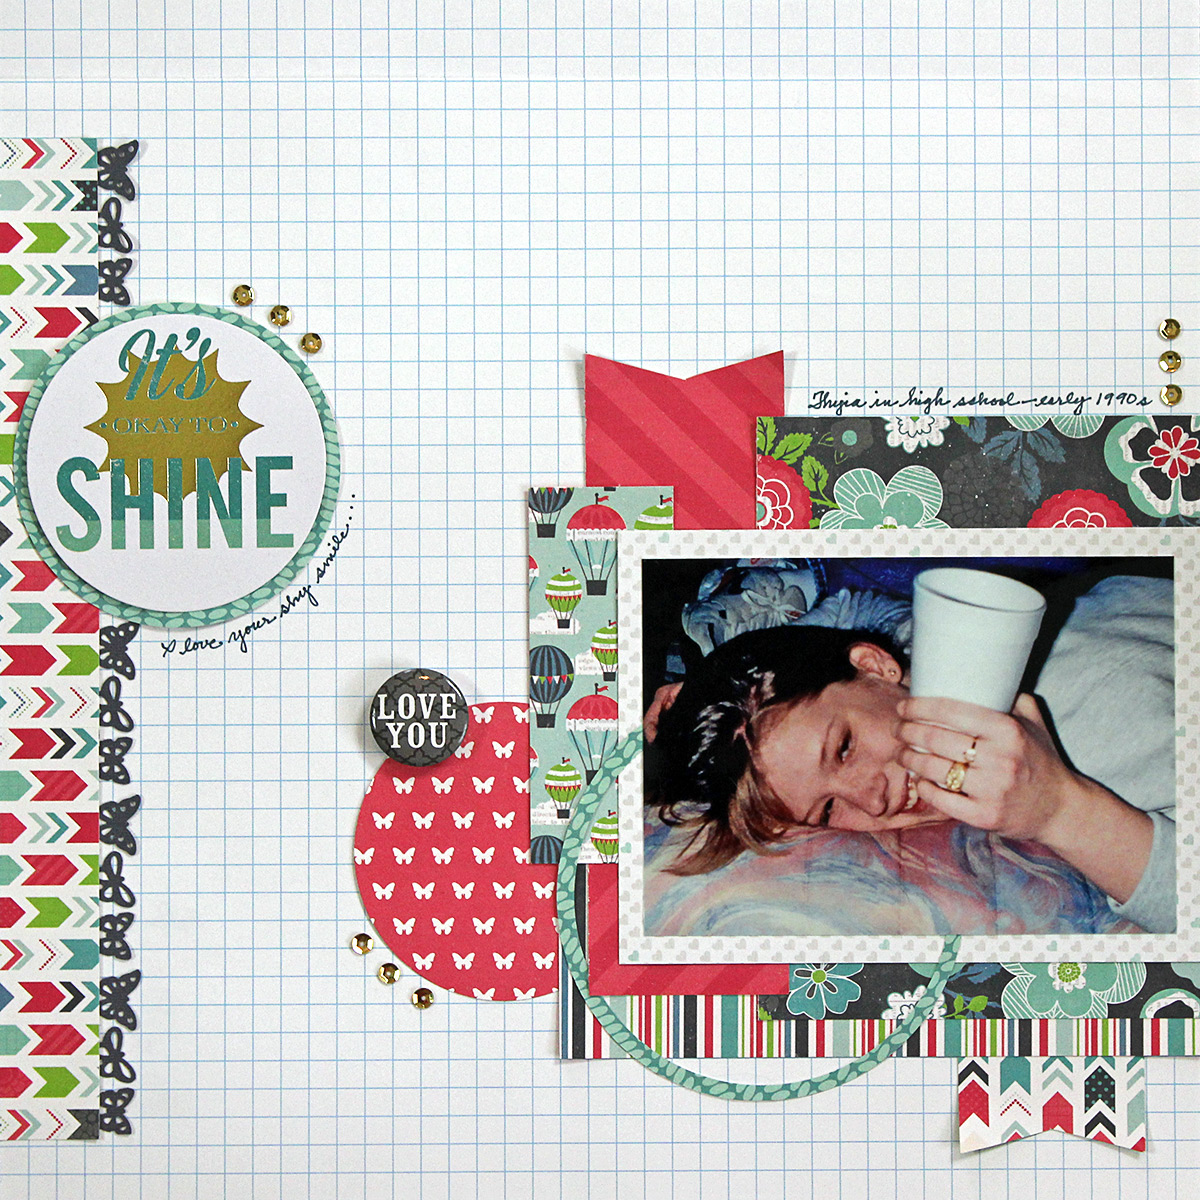 It's okay to shine is a one-photo scrapbook layout using products from Echo Park and a sketch from Let's Get Sketchy.